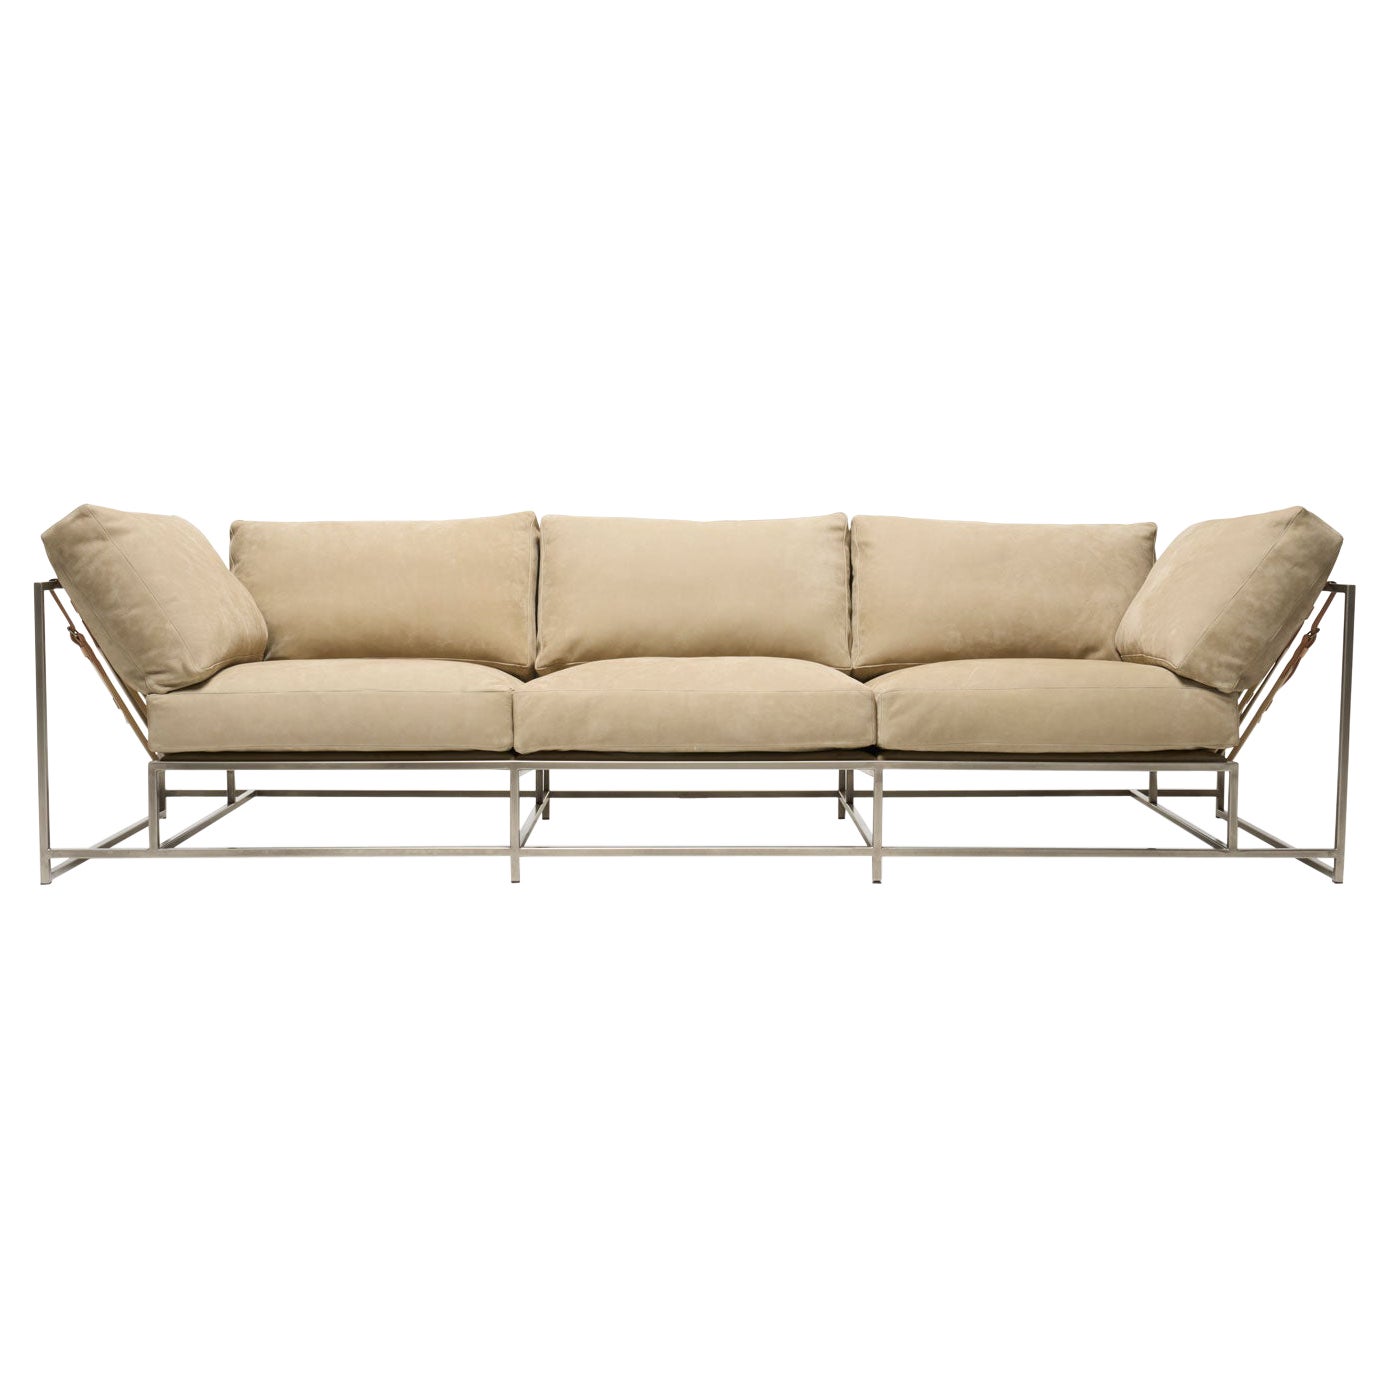 Natural Nubuck Leather and Antique Nickel Sofa